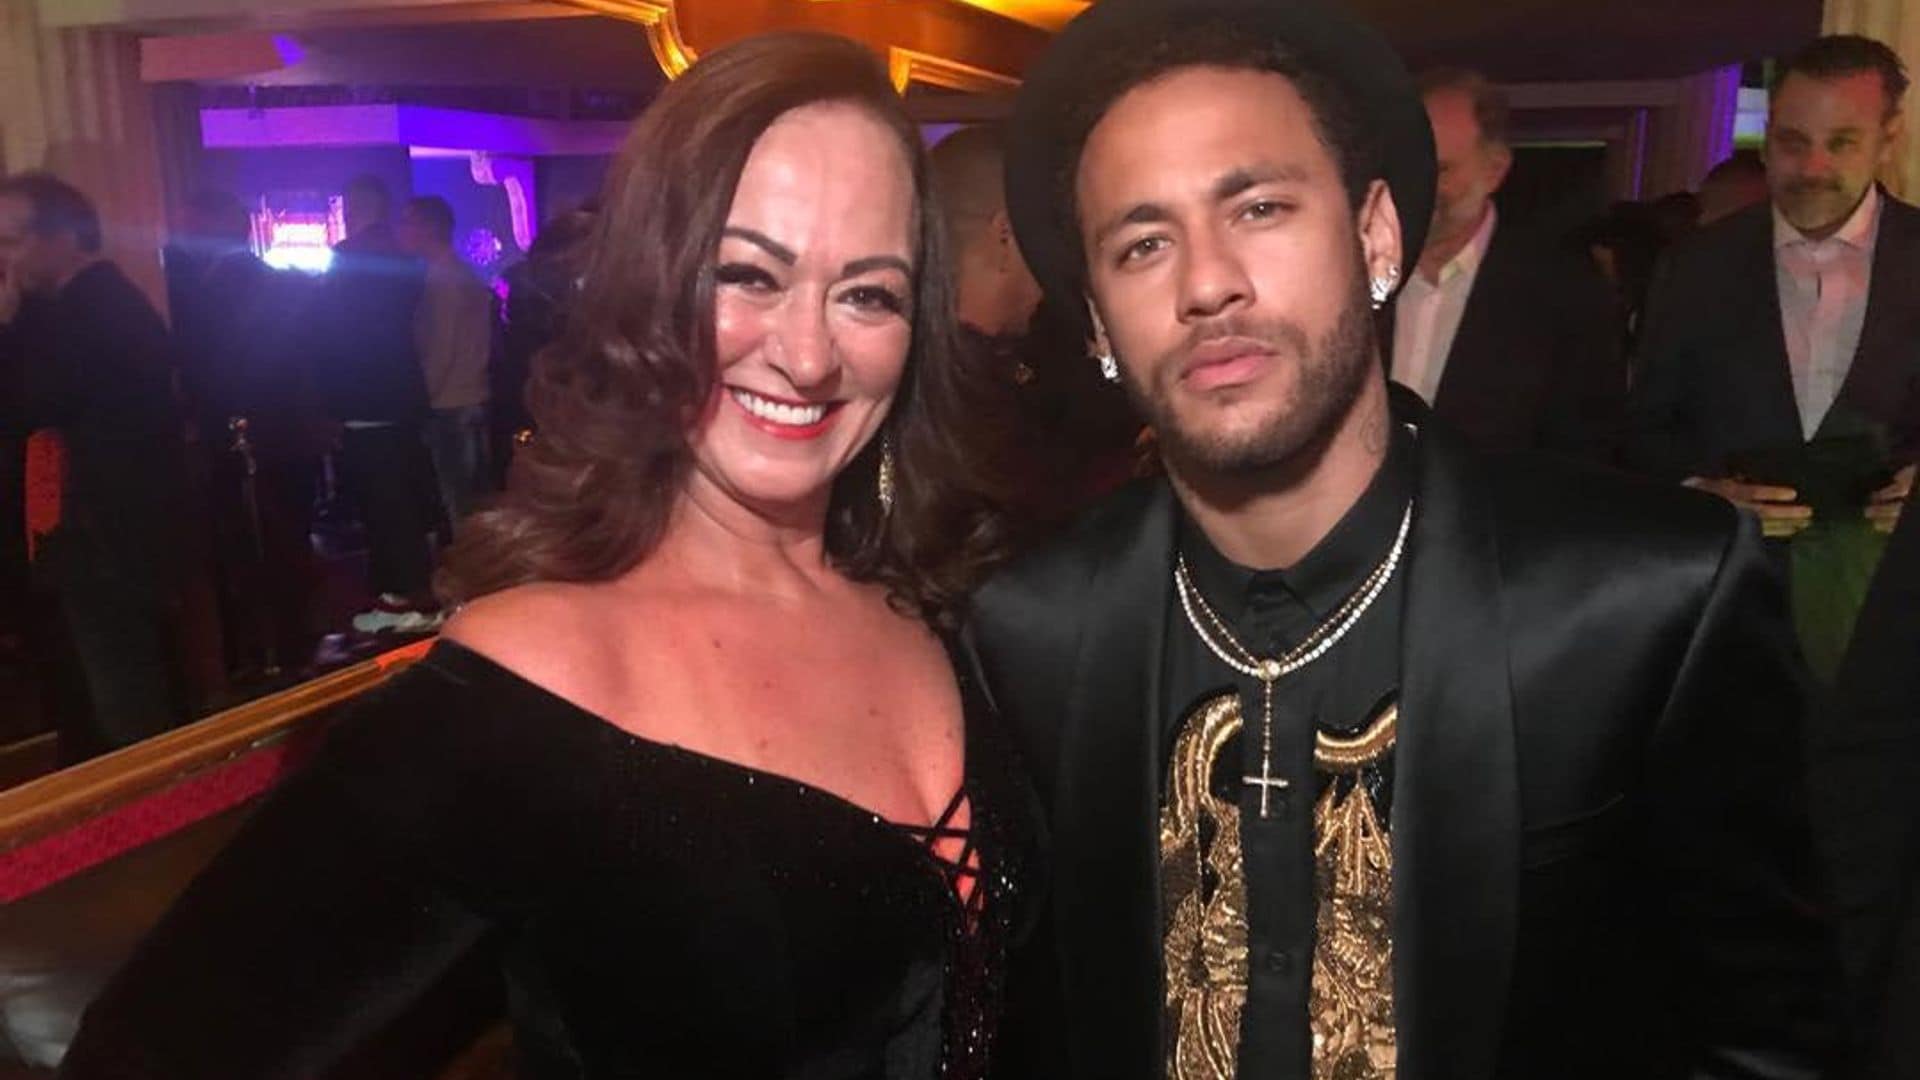 Neymar’s reaction to his mother dating a 22-year-old Brazilian gamer